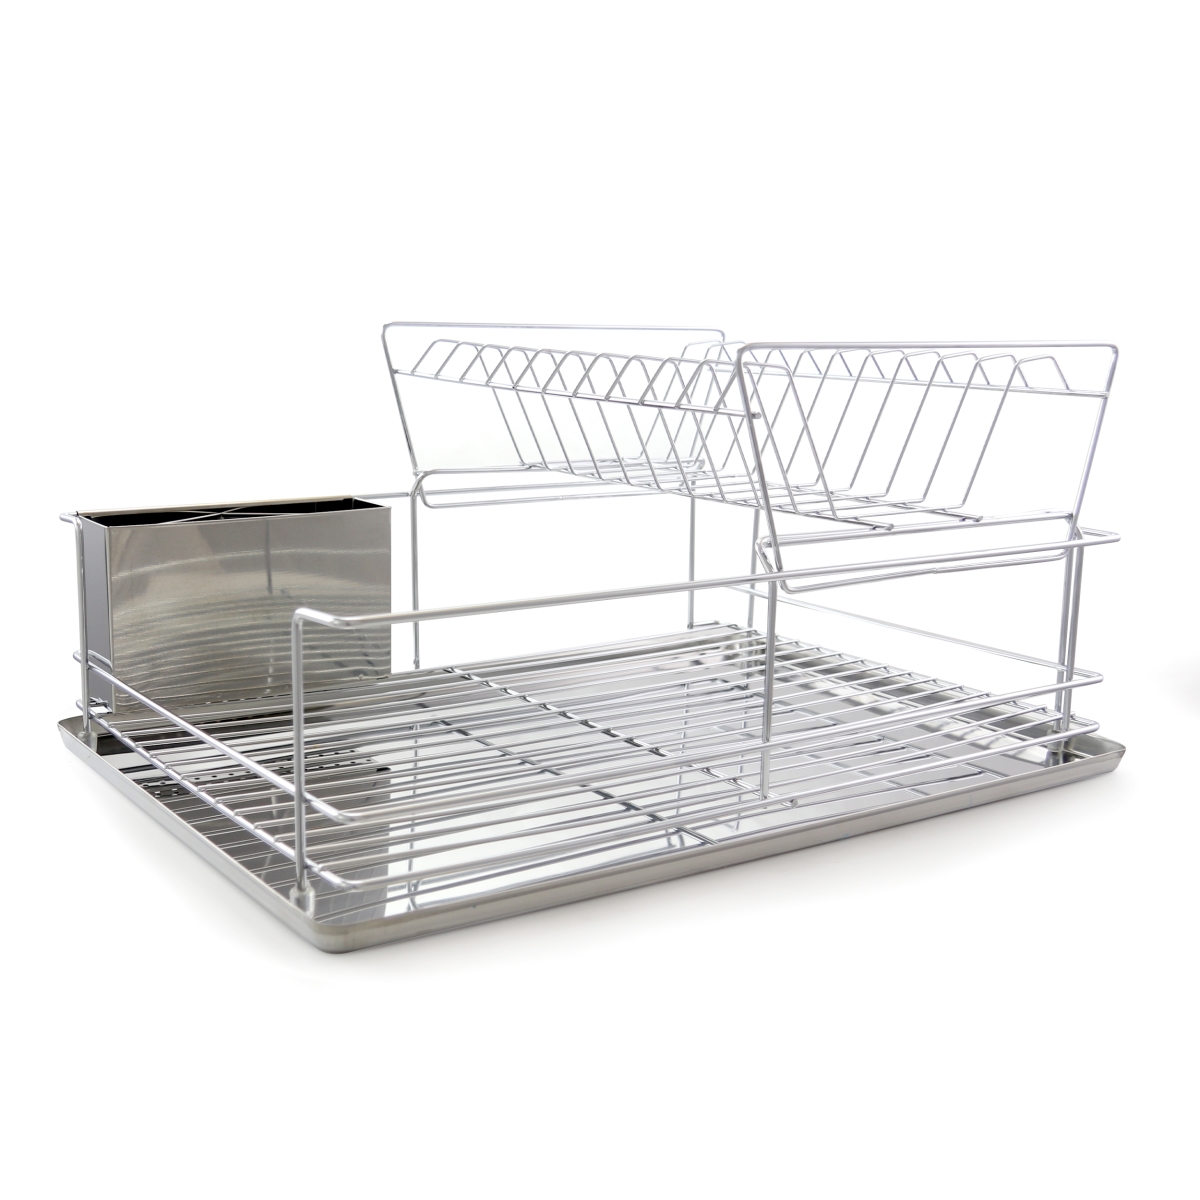 Picture of Better Chef DR-2201 18.5 in. Dish Drying Rack Set - 4 Piece